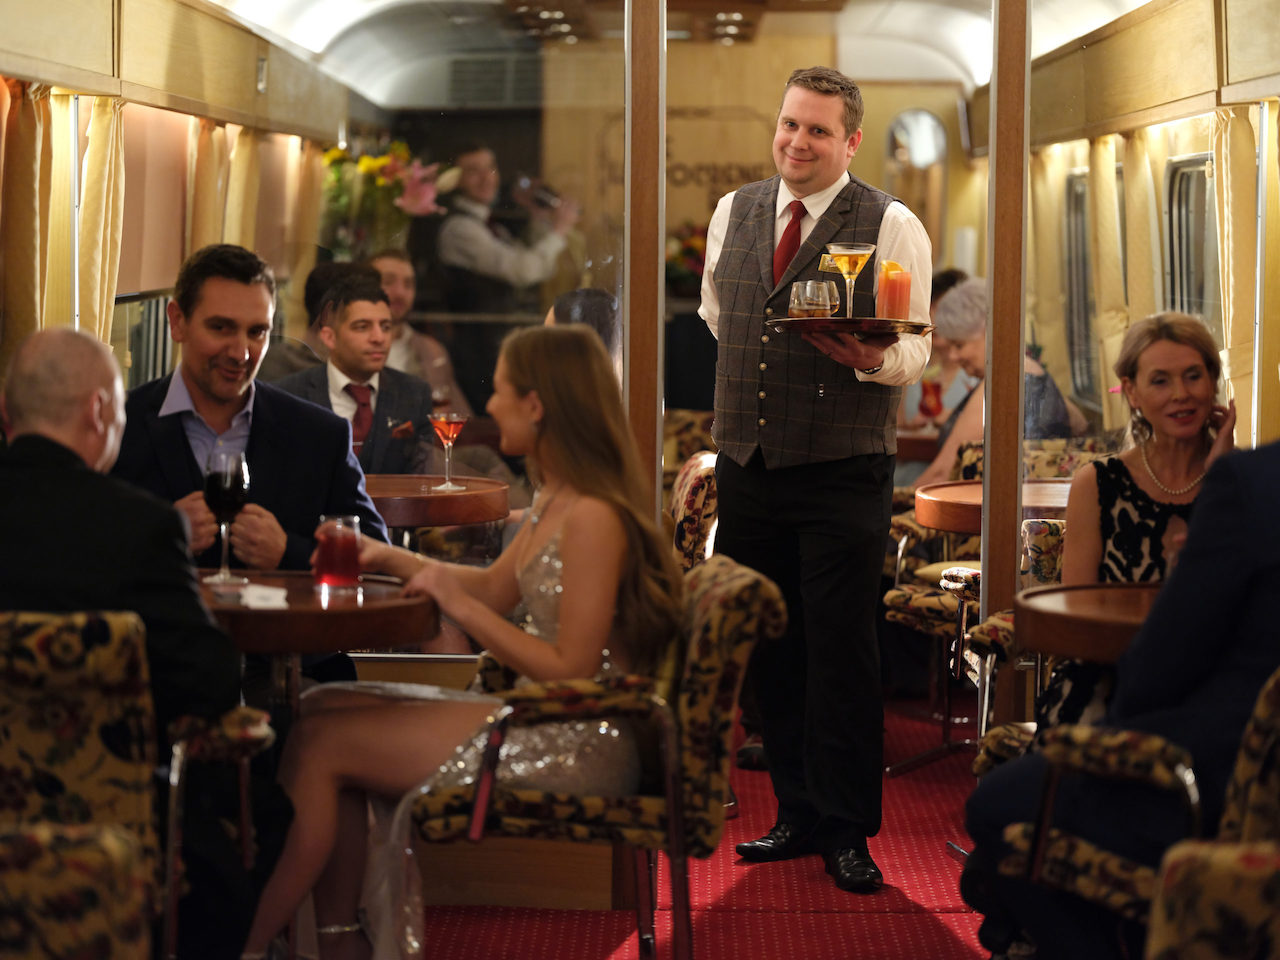 The Steam Dreams Rail Co's The Spirit of Christmas will depart 20 December for a magical evening of celebration aboard the only evening vintage steam train departing London this season.